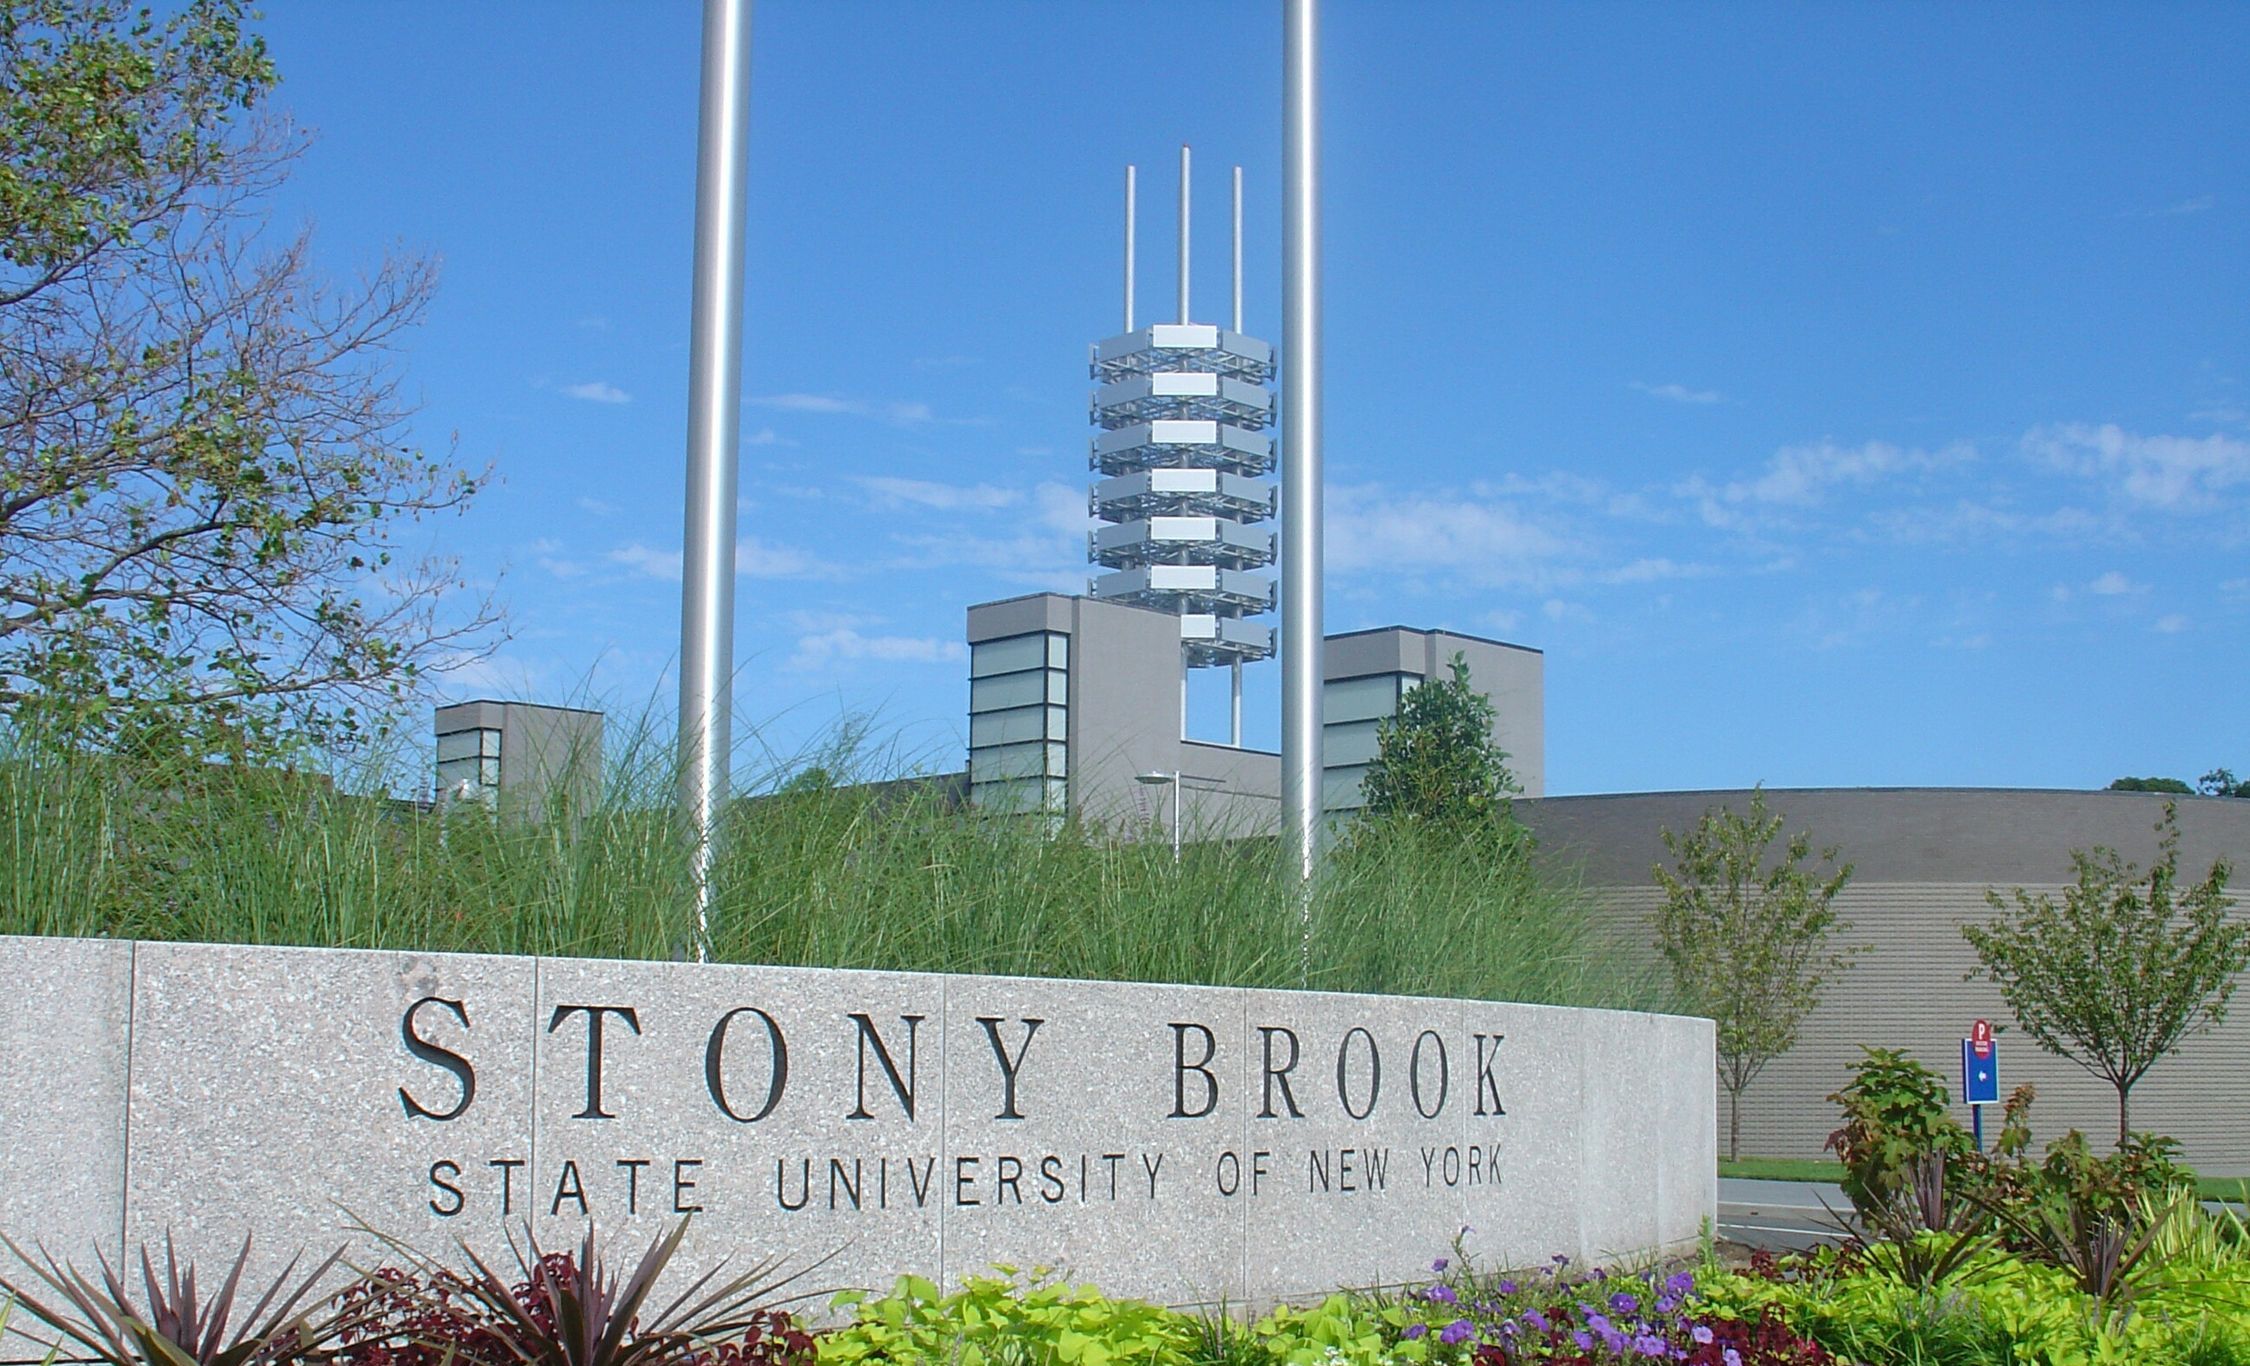 Indian American couple donates $13M to Stony Brook University cancer research